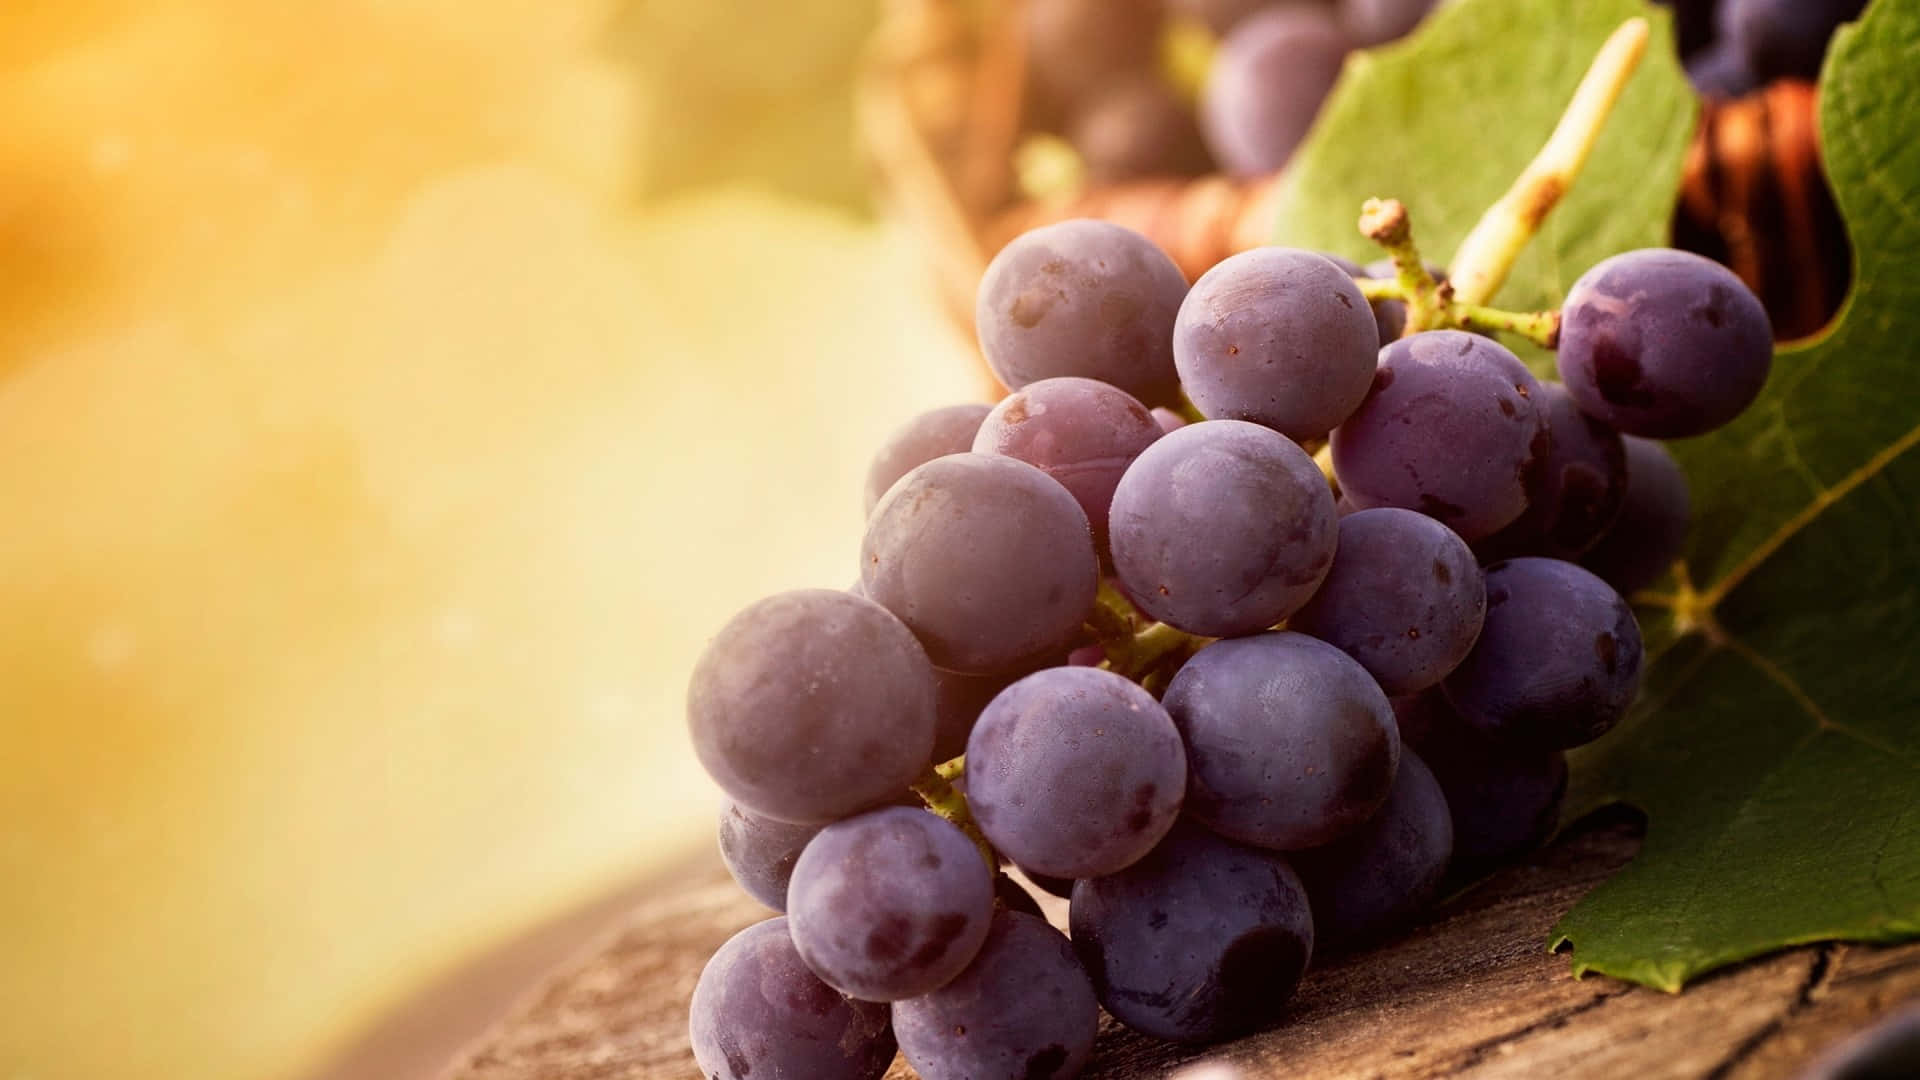 Juicy purple grapes hanging on the vine Wallpaper